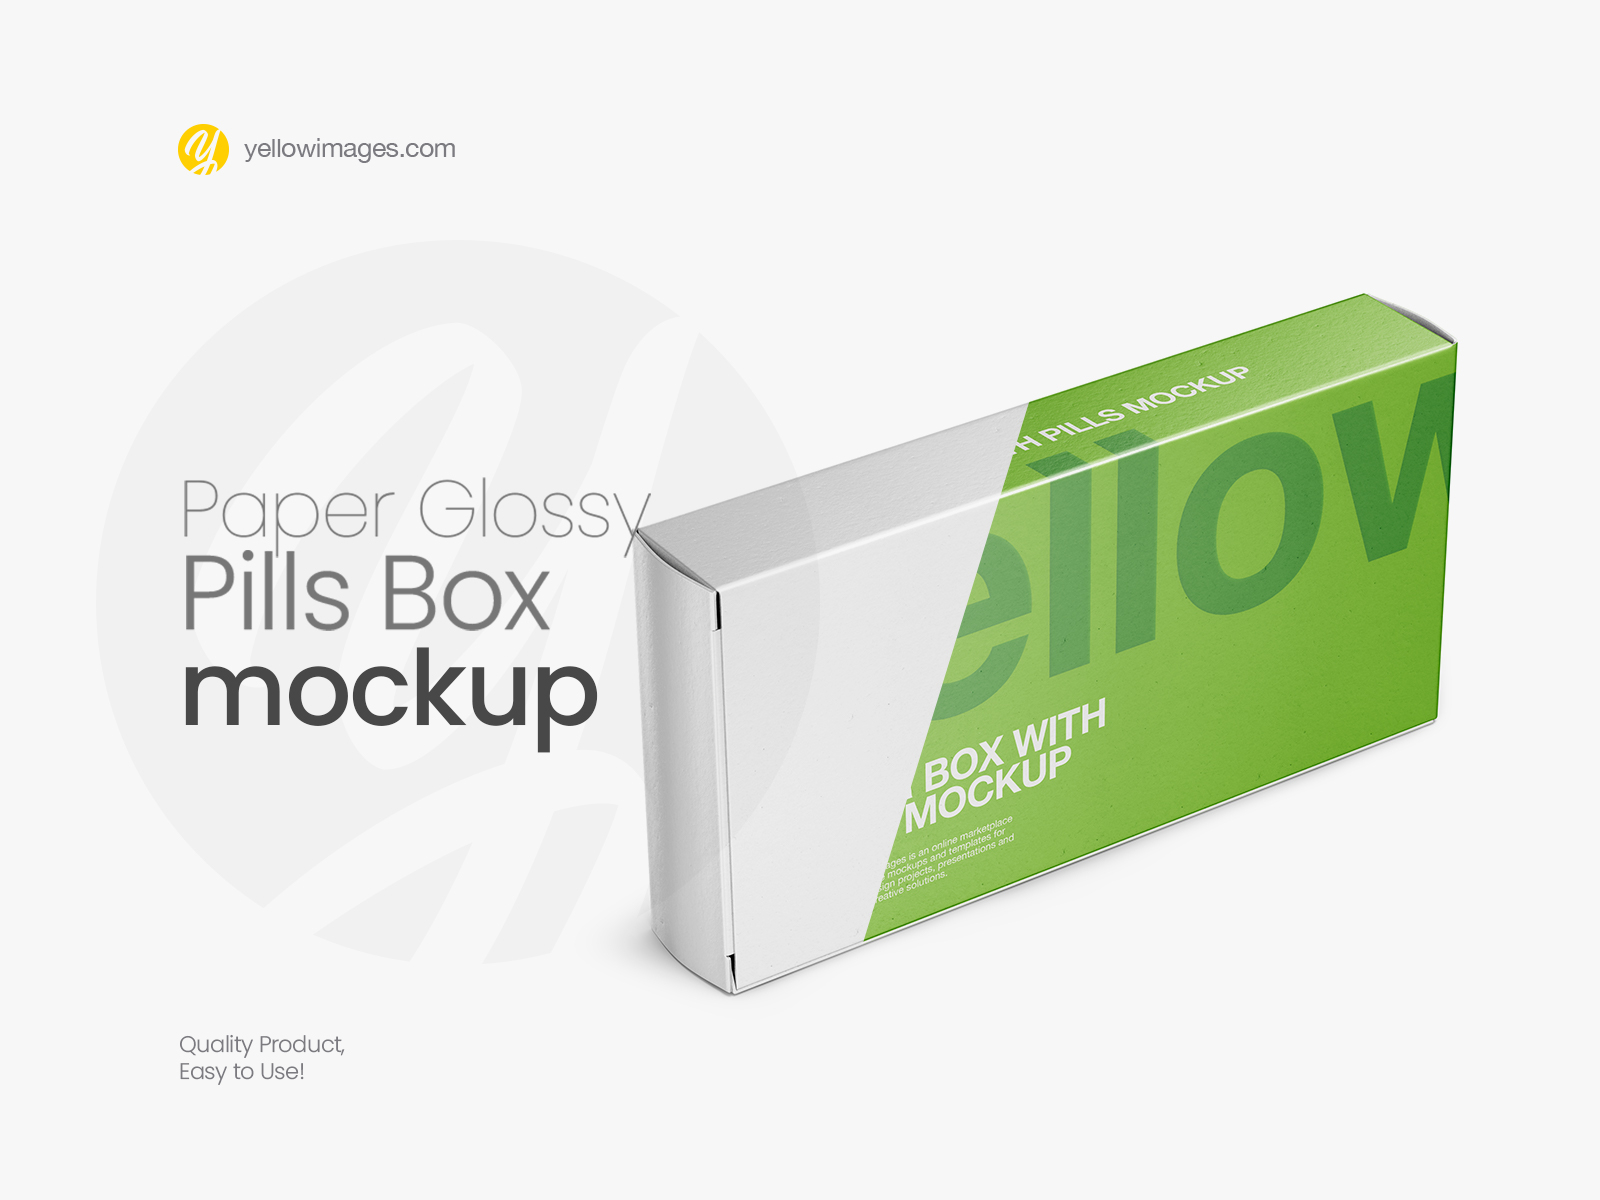 Download Quality Carton Packaging Co Download Free And Premium Psd Mockup Templates Yellowimages Mockups